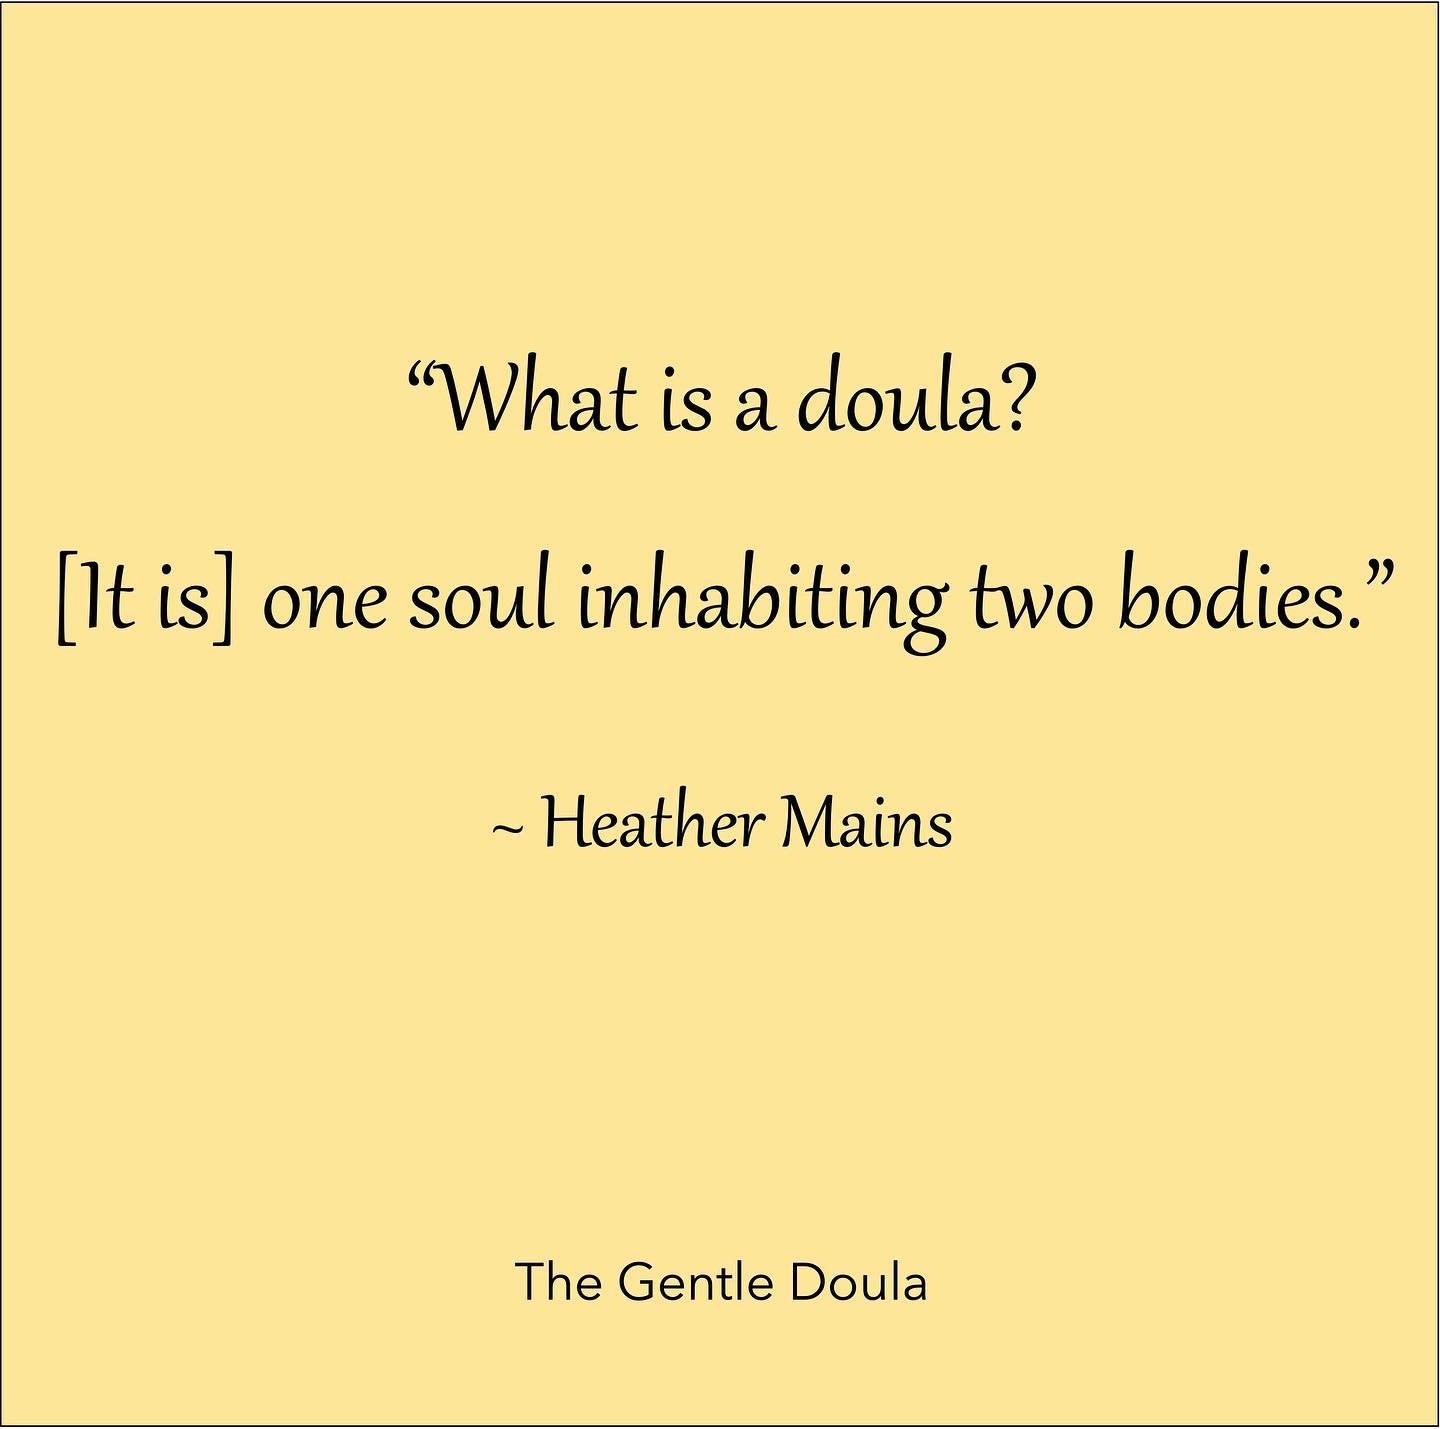 Aristotle defined a friend as &lsquo;one soul inhabiting two bodies&rsquo;. What a lovely description of the closeness that friendship can bring. 
.
And perhaps even more beautiful is the way Heather Mains saw that same connection in a doula-client r